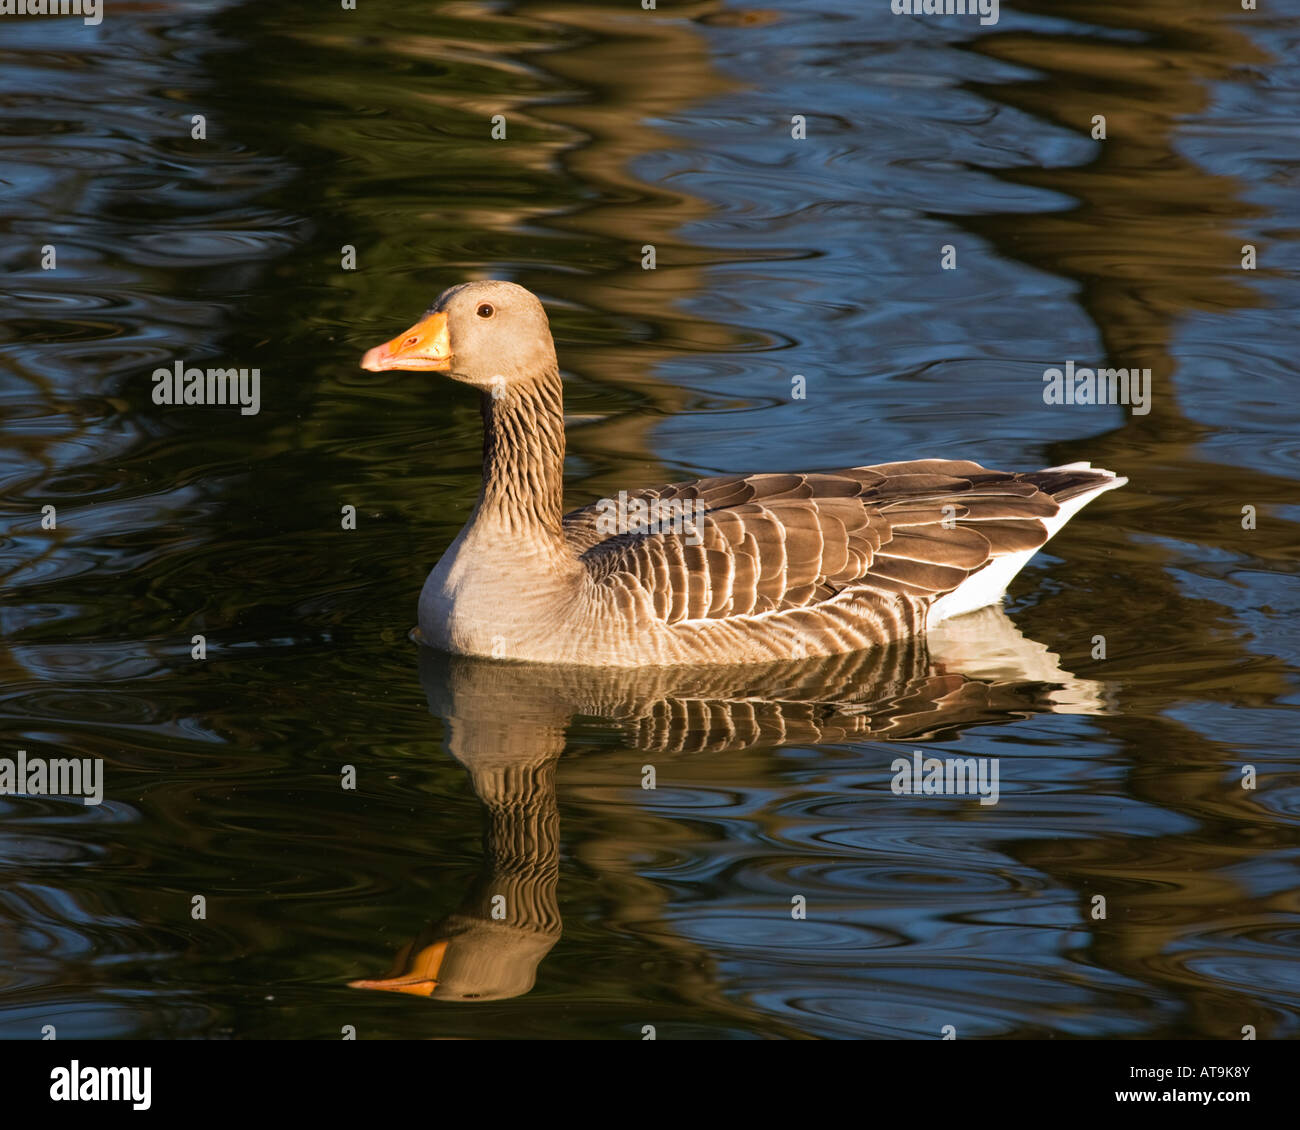 Greylag Goose swimming on water at Essex,England,UK Stock Photo